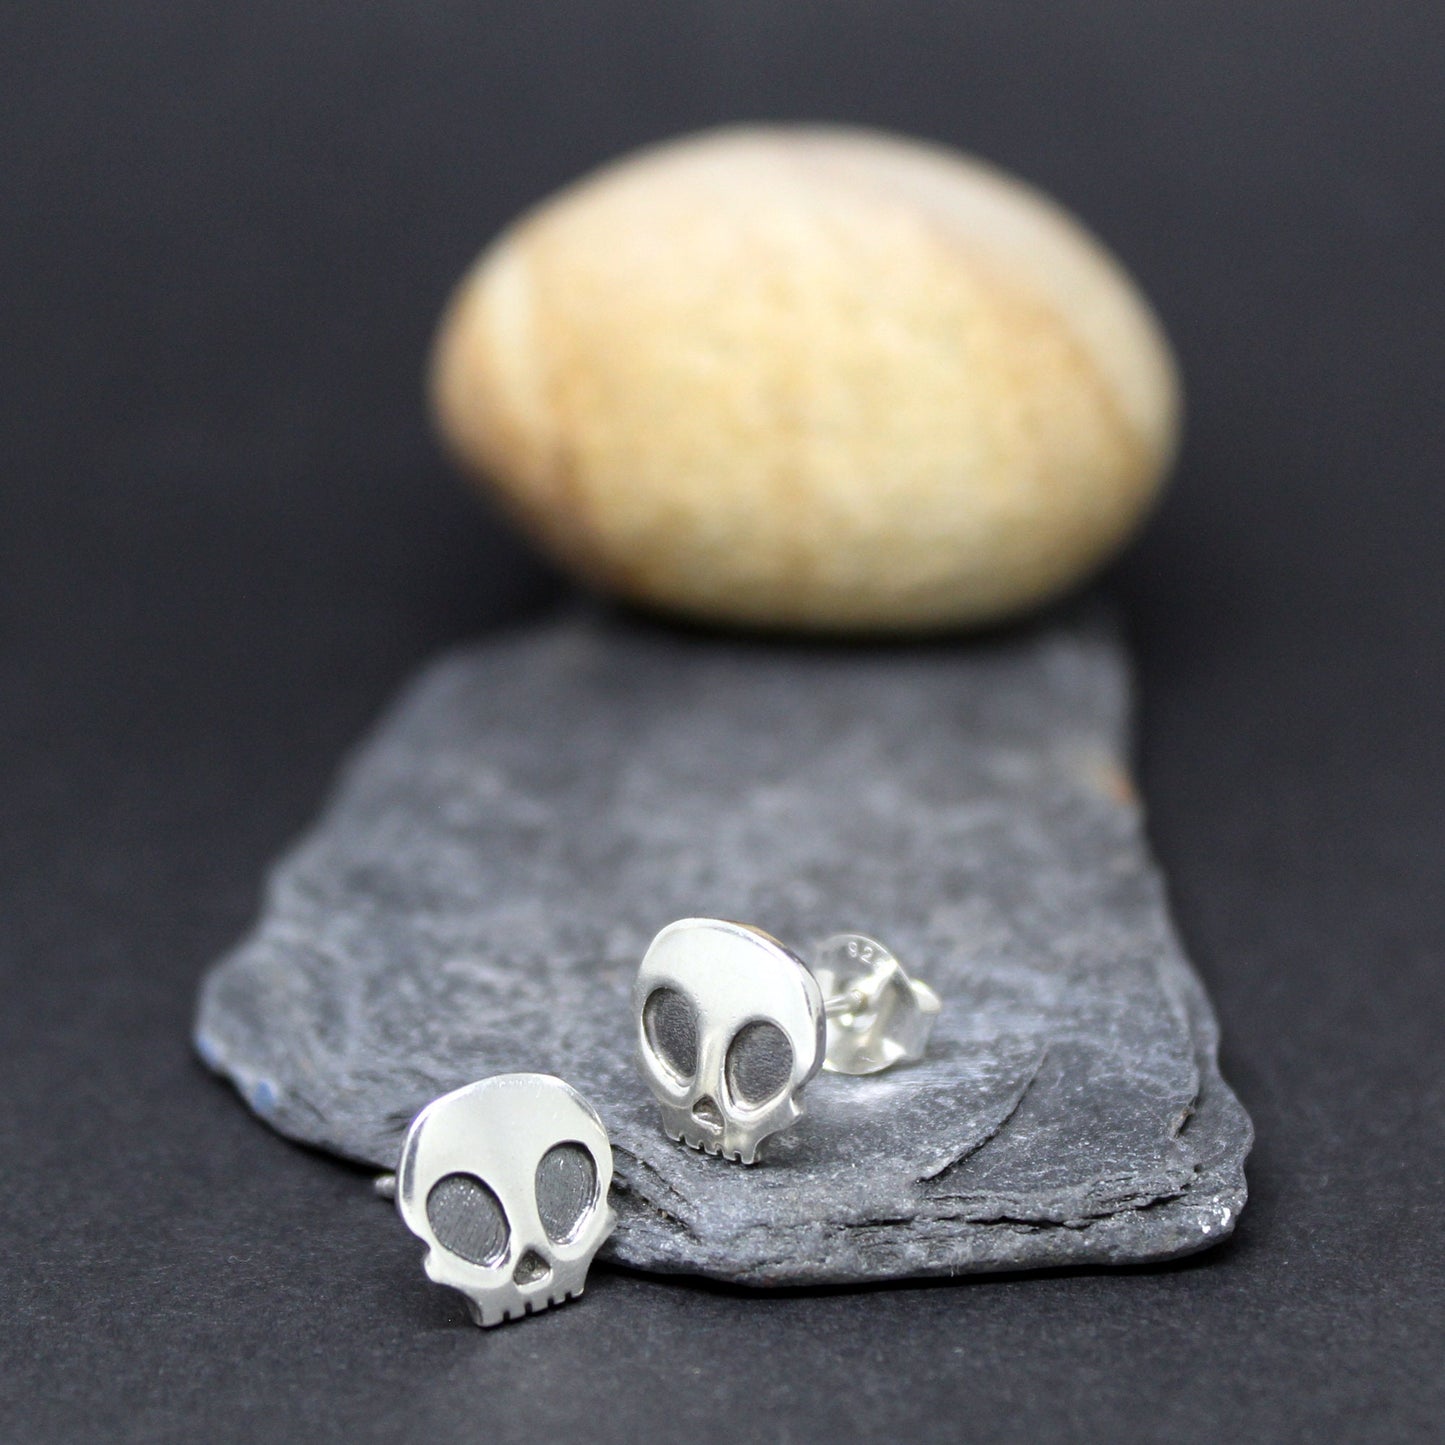 925 silver skull earrings with patina